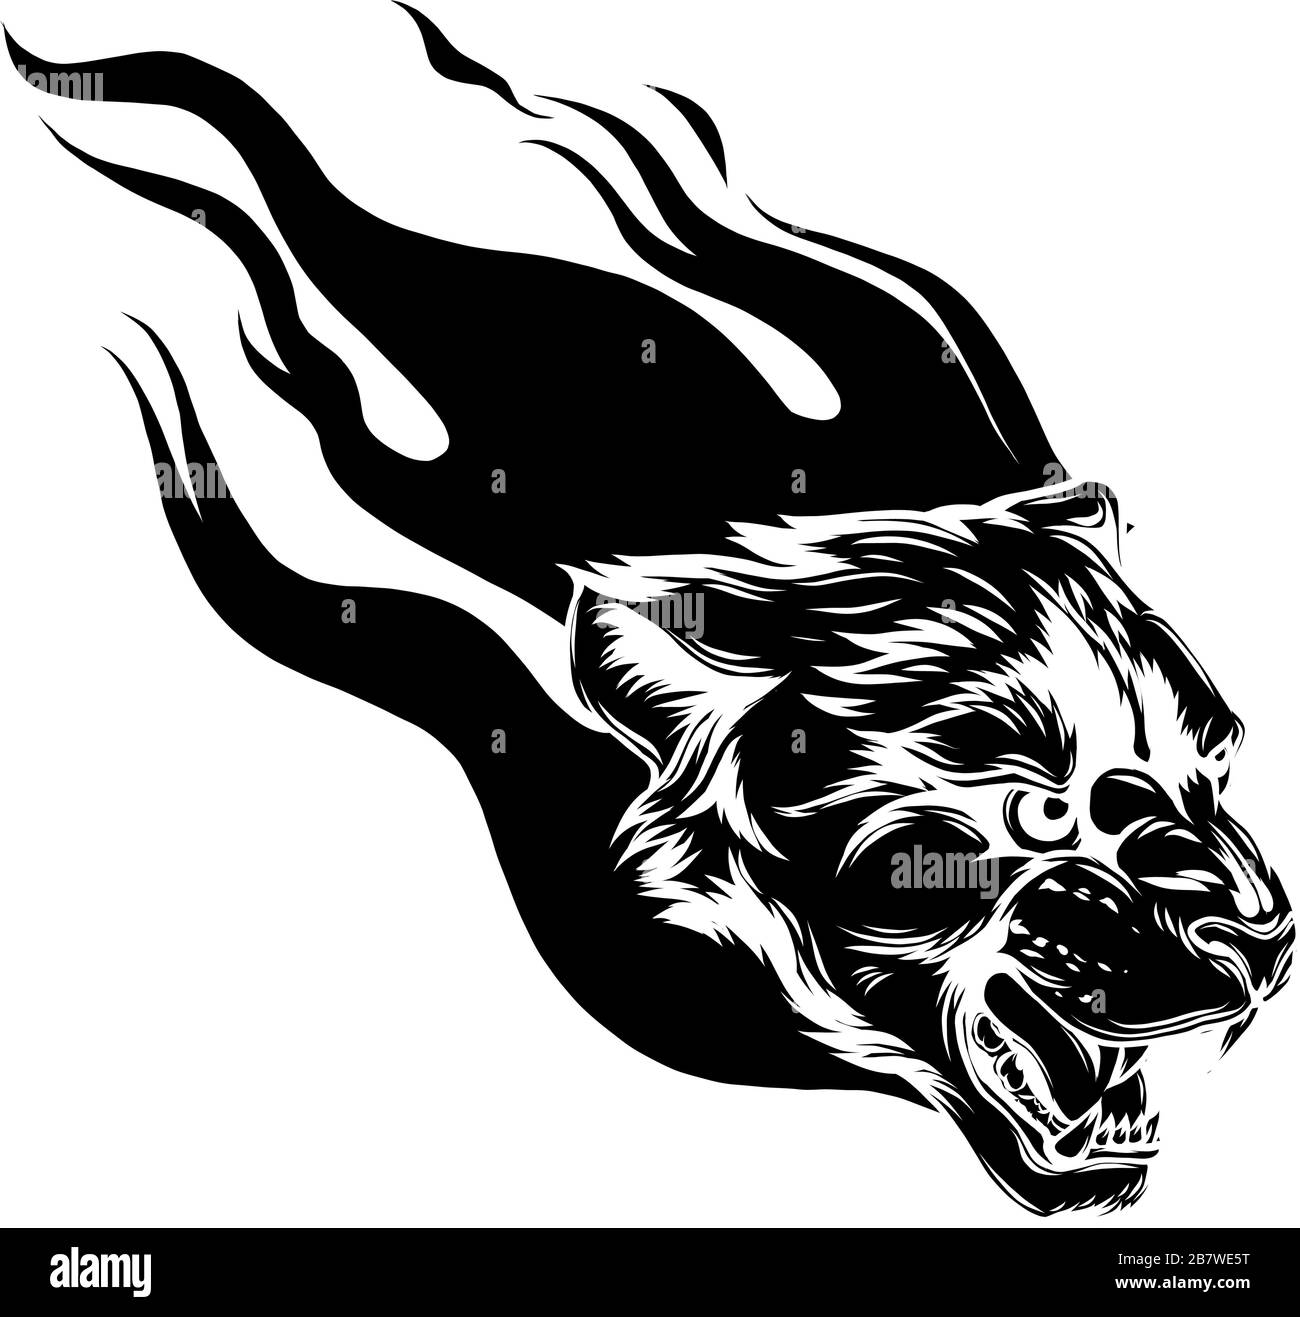 Jaguar head with Flame Tattoo vector illustration Stock Vector